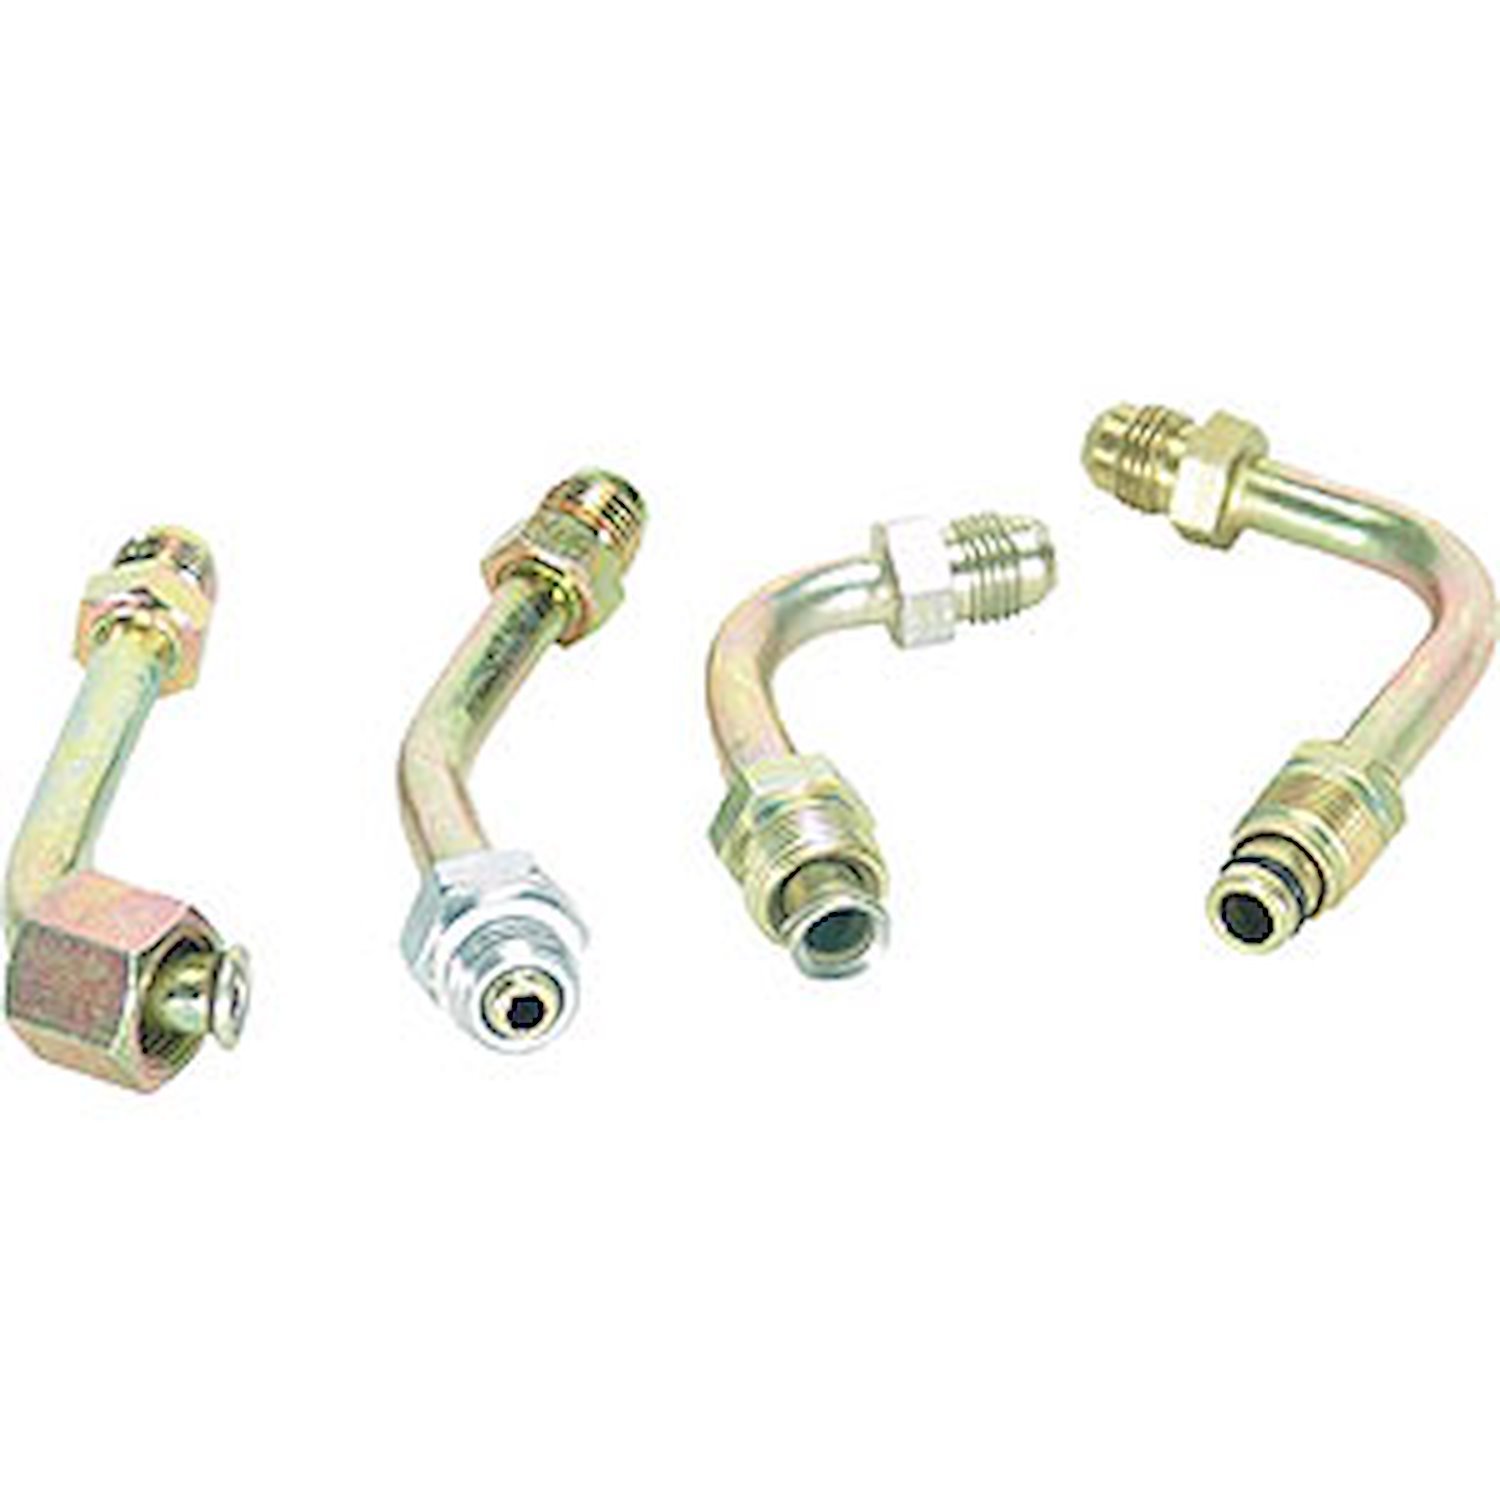 HI Series 35KIT Up to 1998 Ford